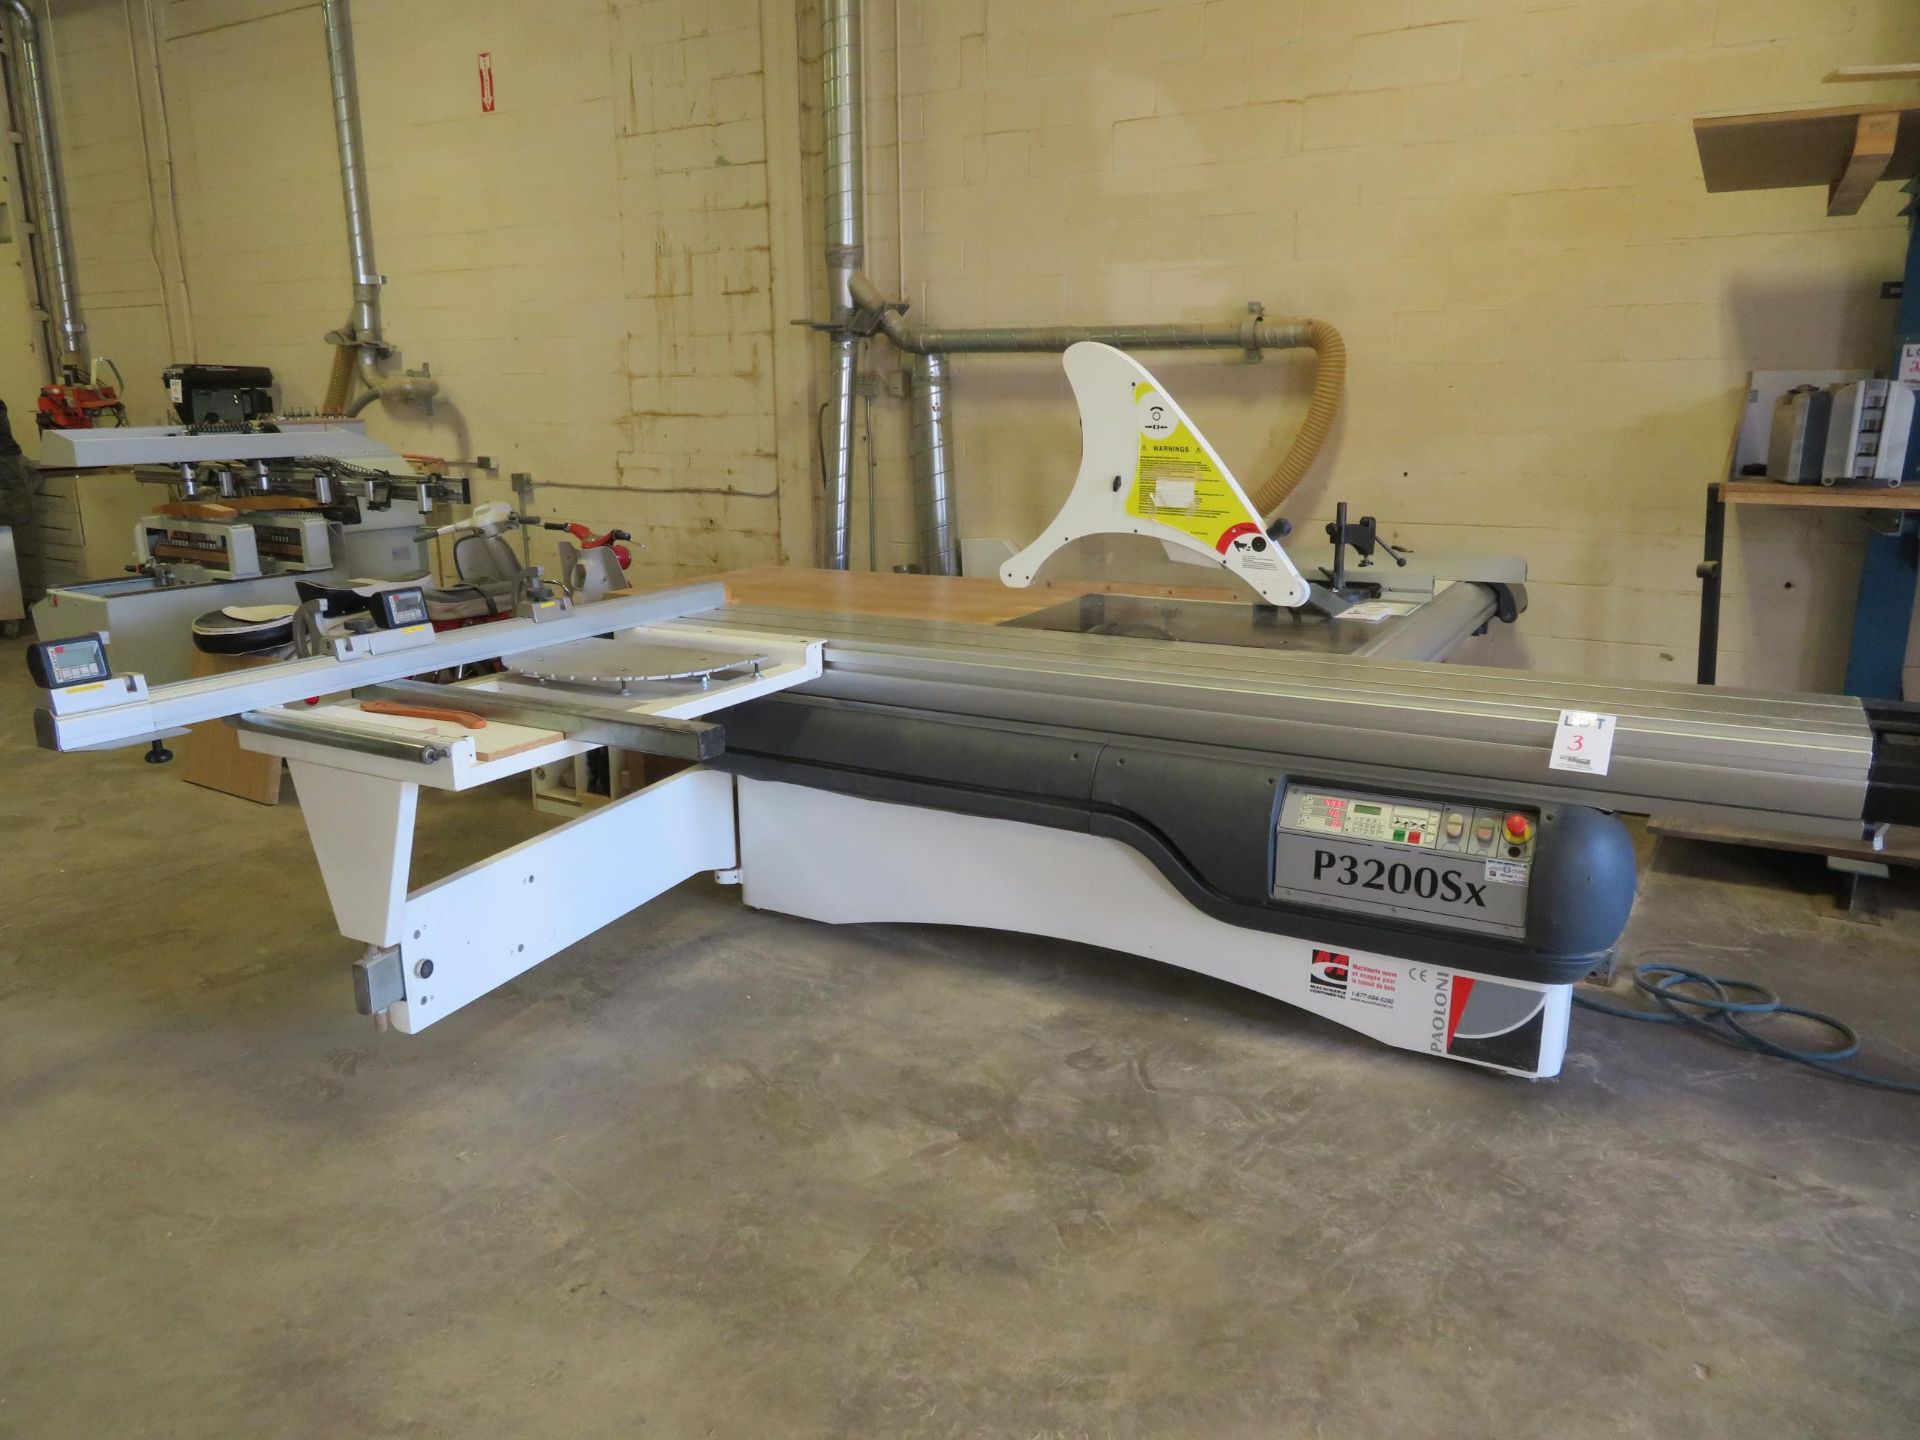 PAOLINI Sliding table saw, Mod# P3200SX (Made in Italy), 575 volts, power : 6 KW, 3 phase, 60 HZ, 10